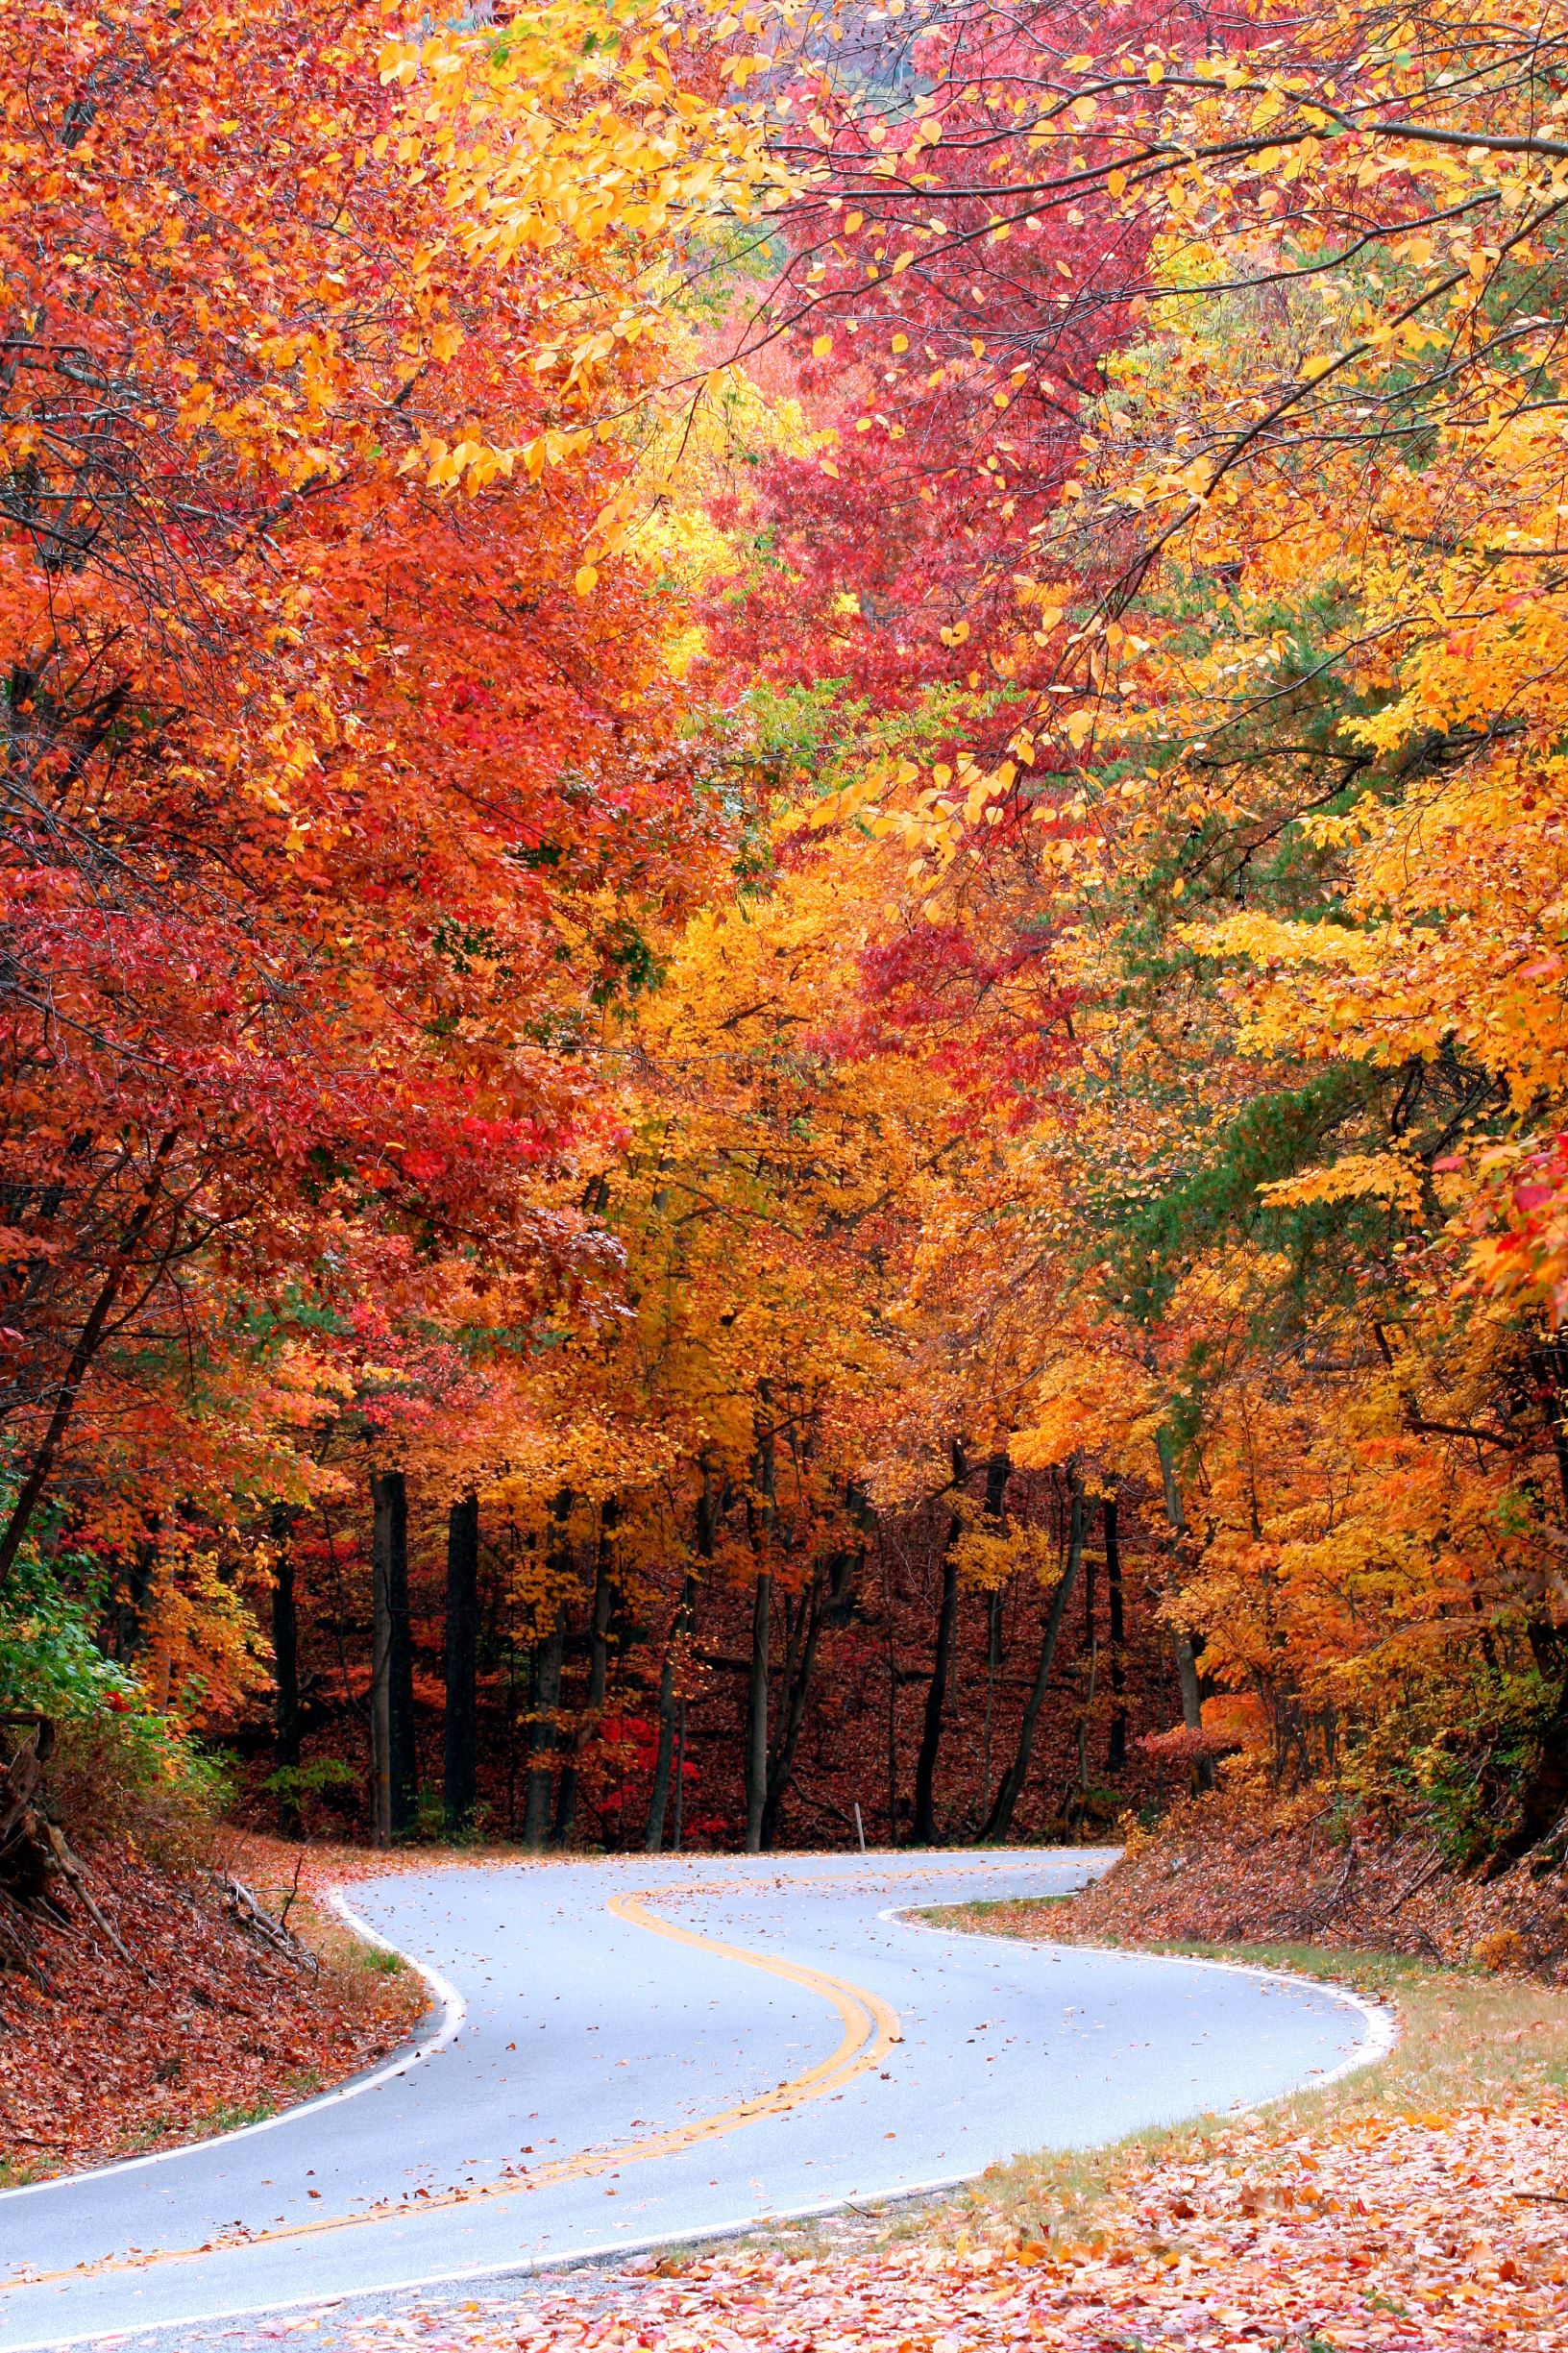 THE TREES WITH THE FALL FOLIAGE HUES with a winding road